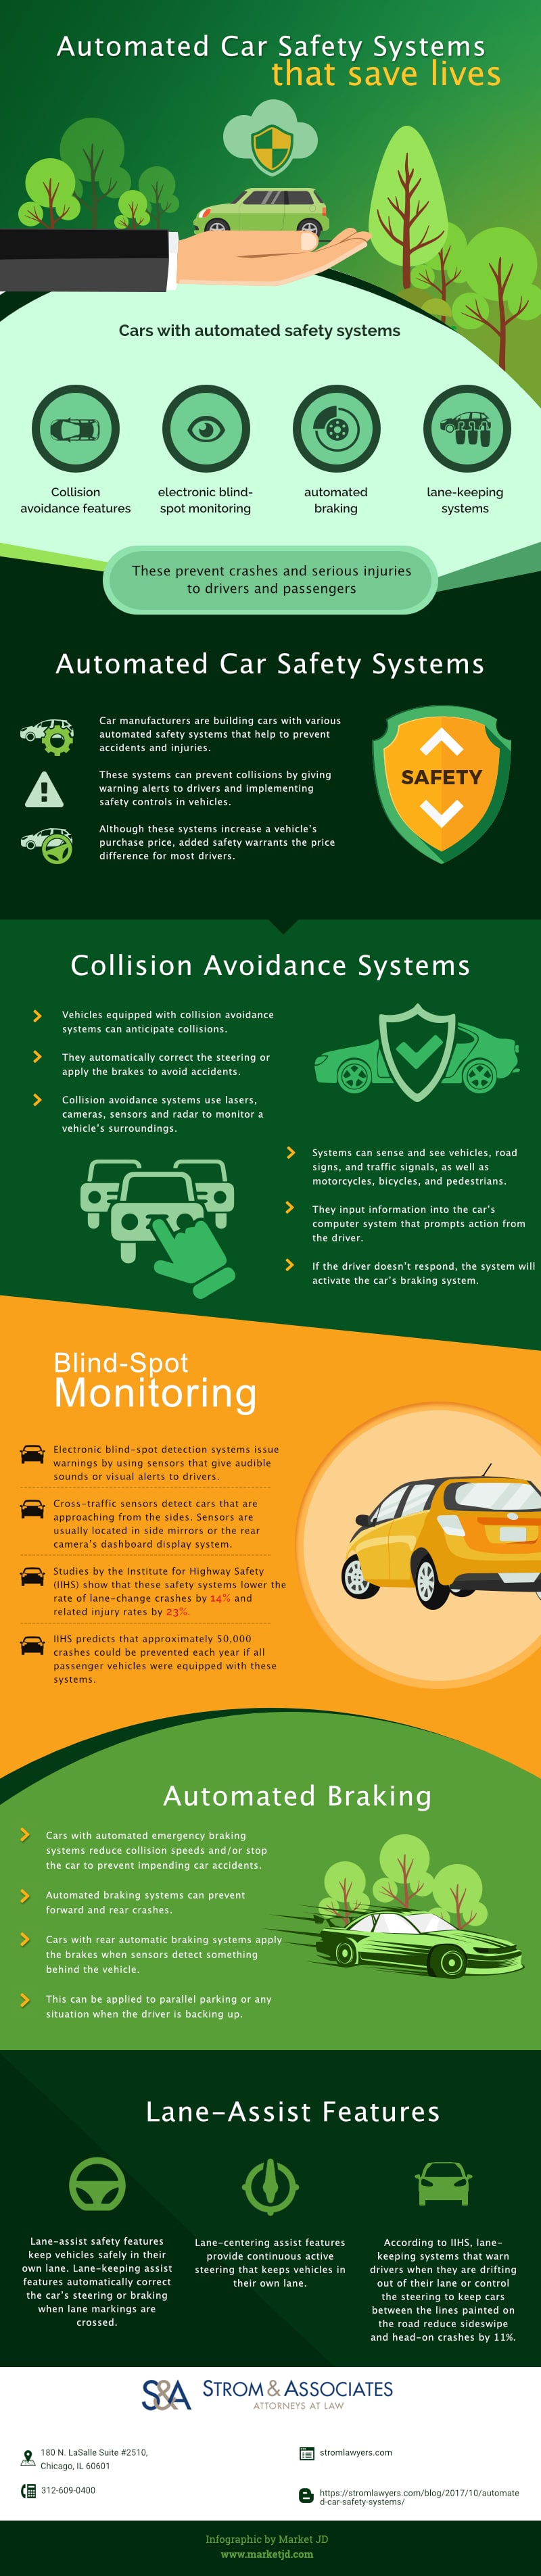 Automated car safety systems infographic